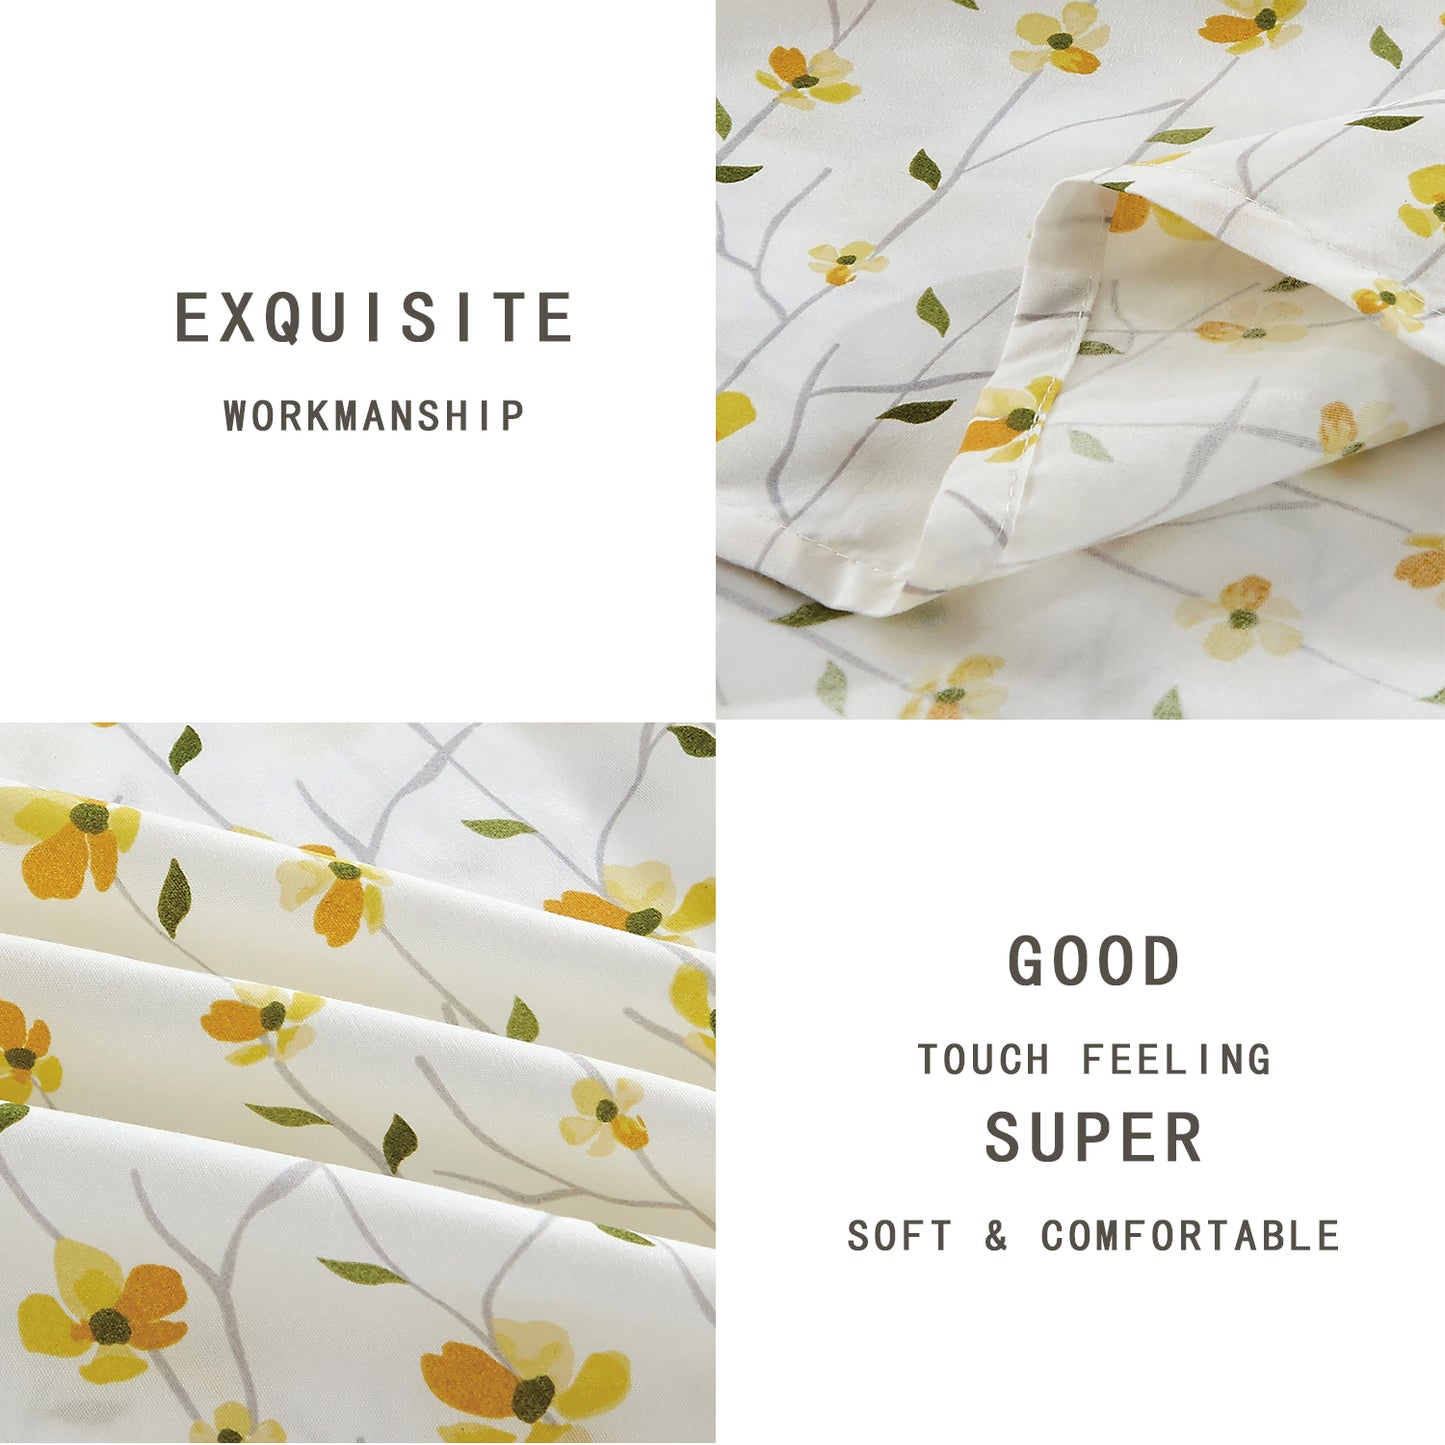 percale sheets